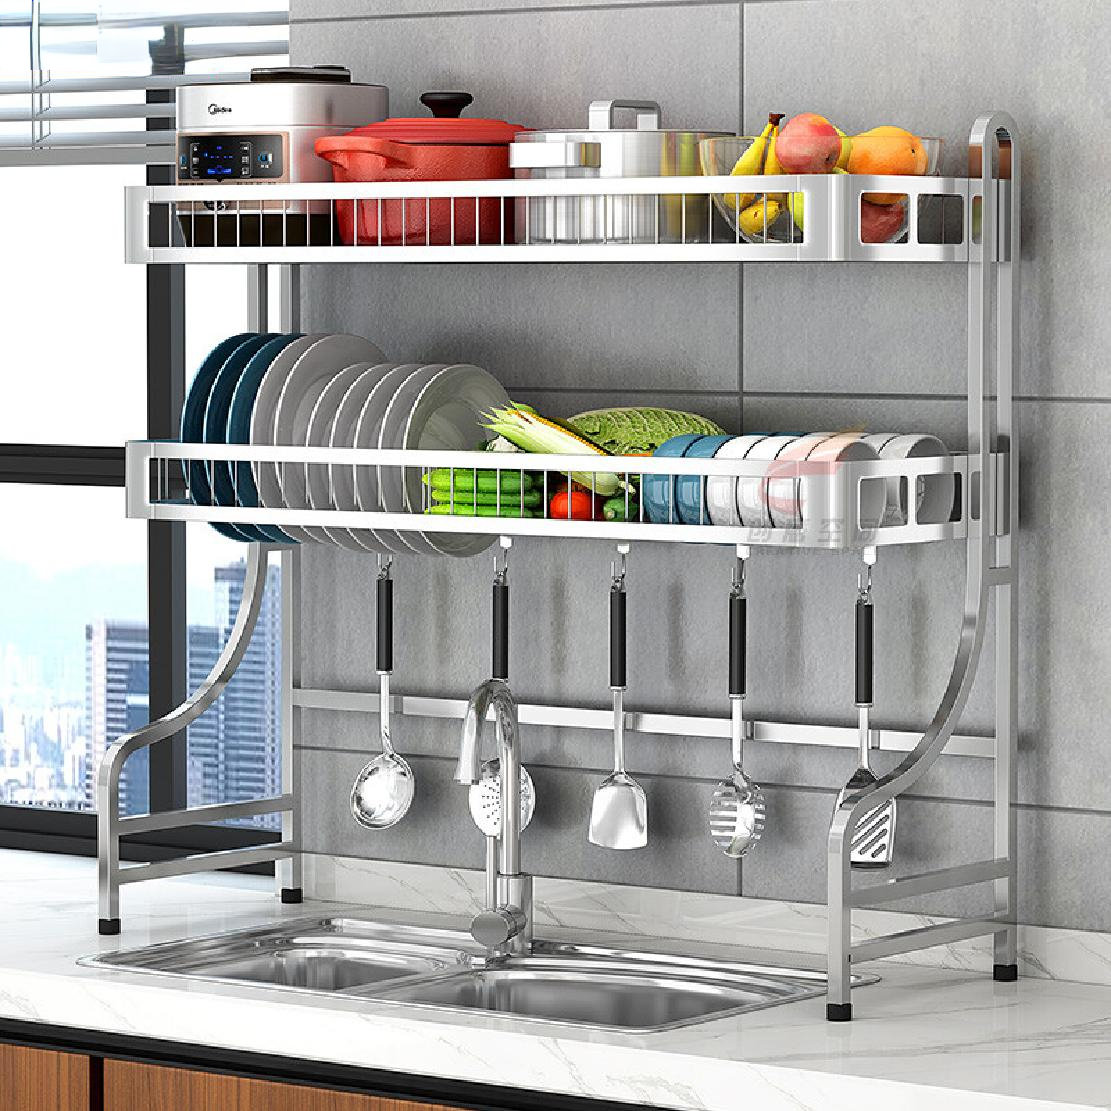 Captive Gala Multifunctional Stainless Steel over the Sink Dish Rack